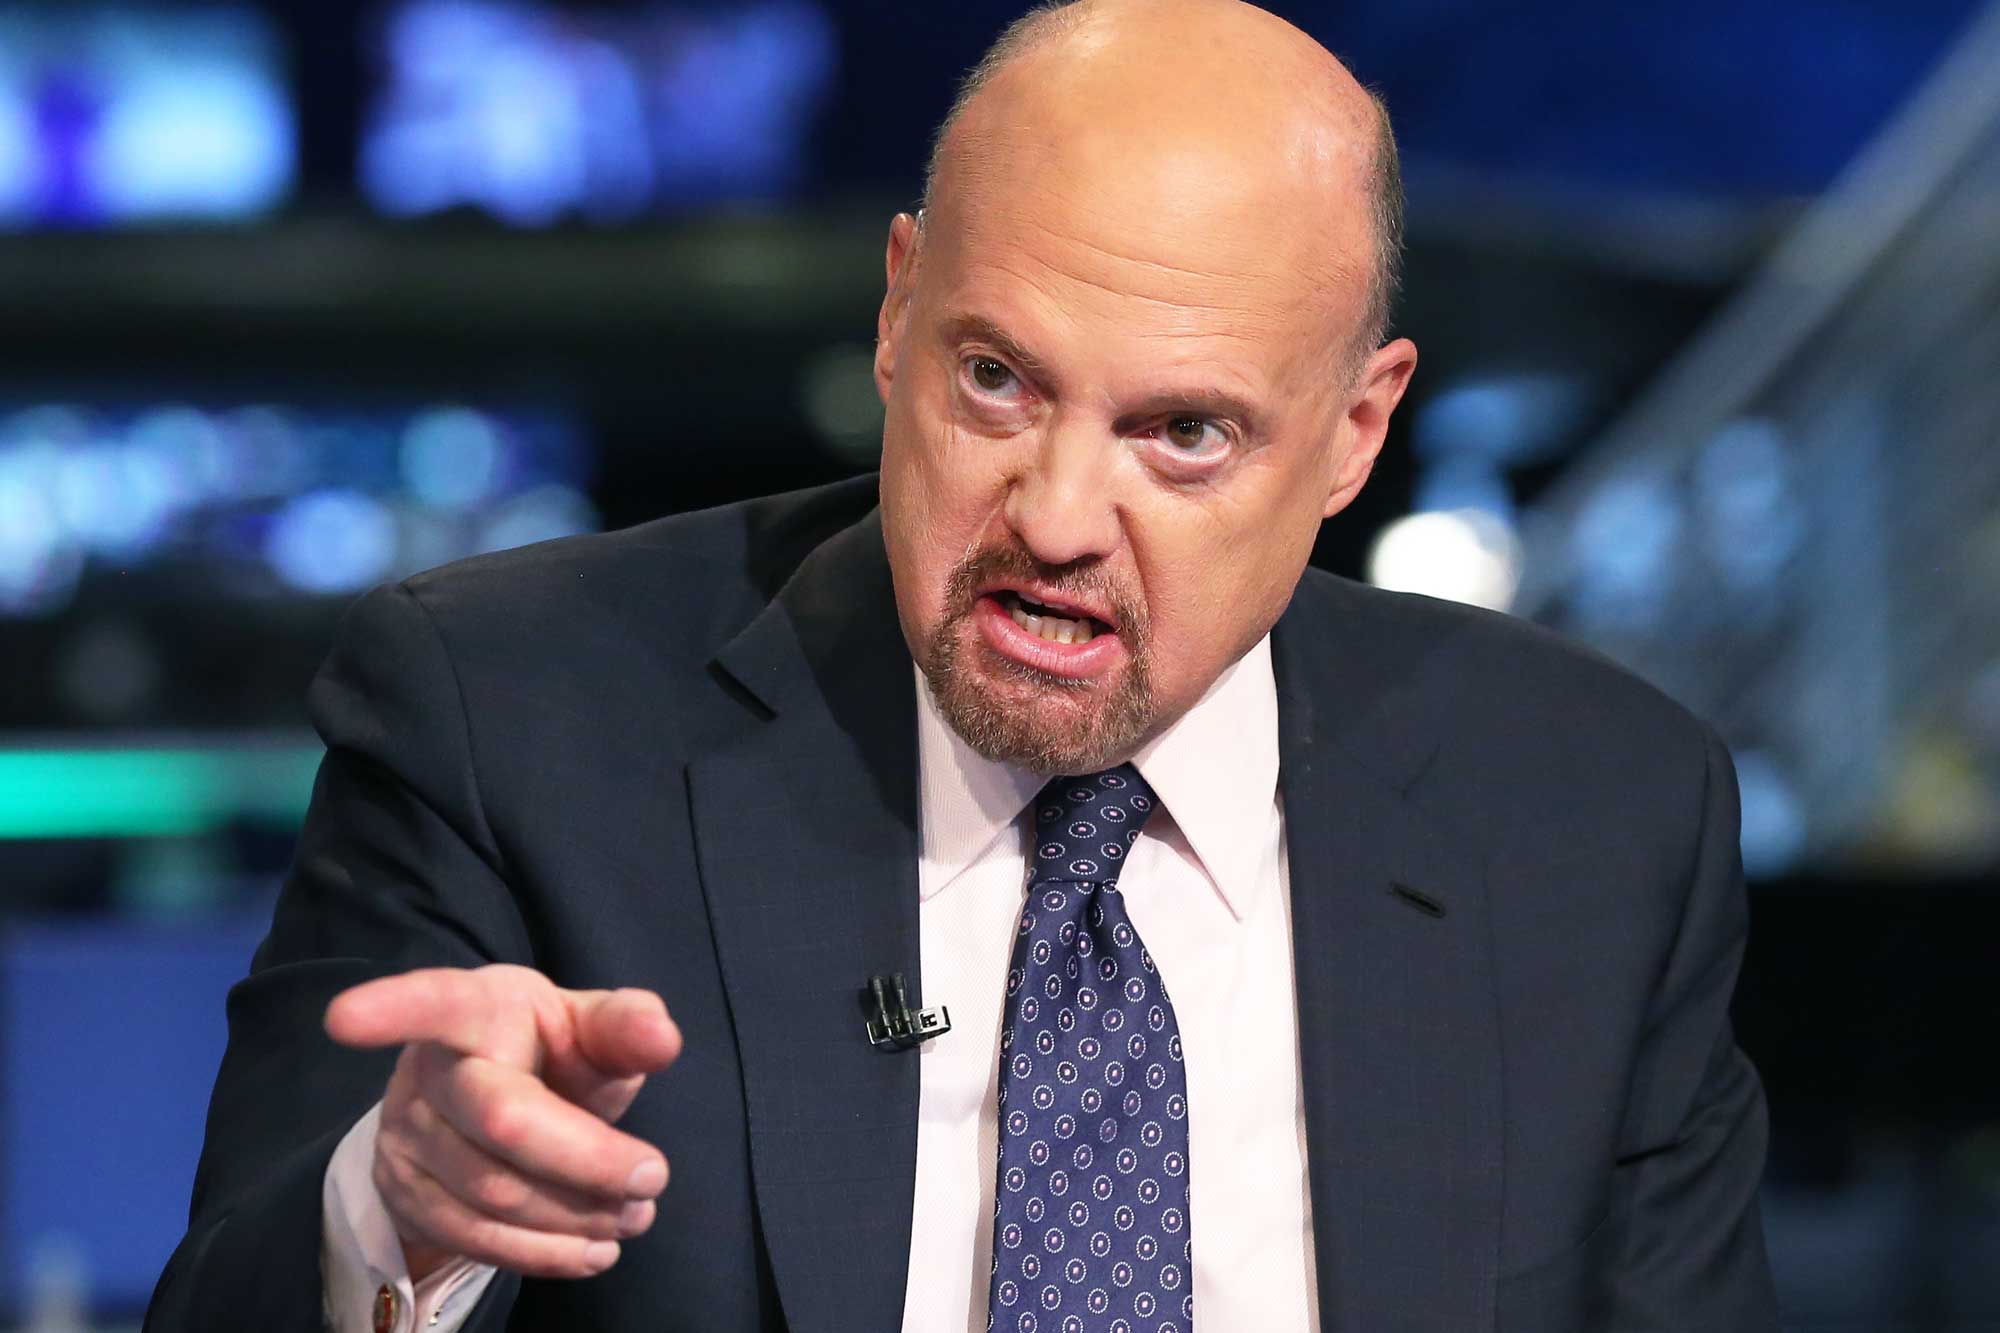 Cramer: Invest for long haul to avoid going bust in short-term Archegos, GameStop-type chaos - CNBC